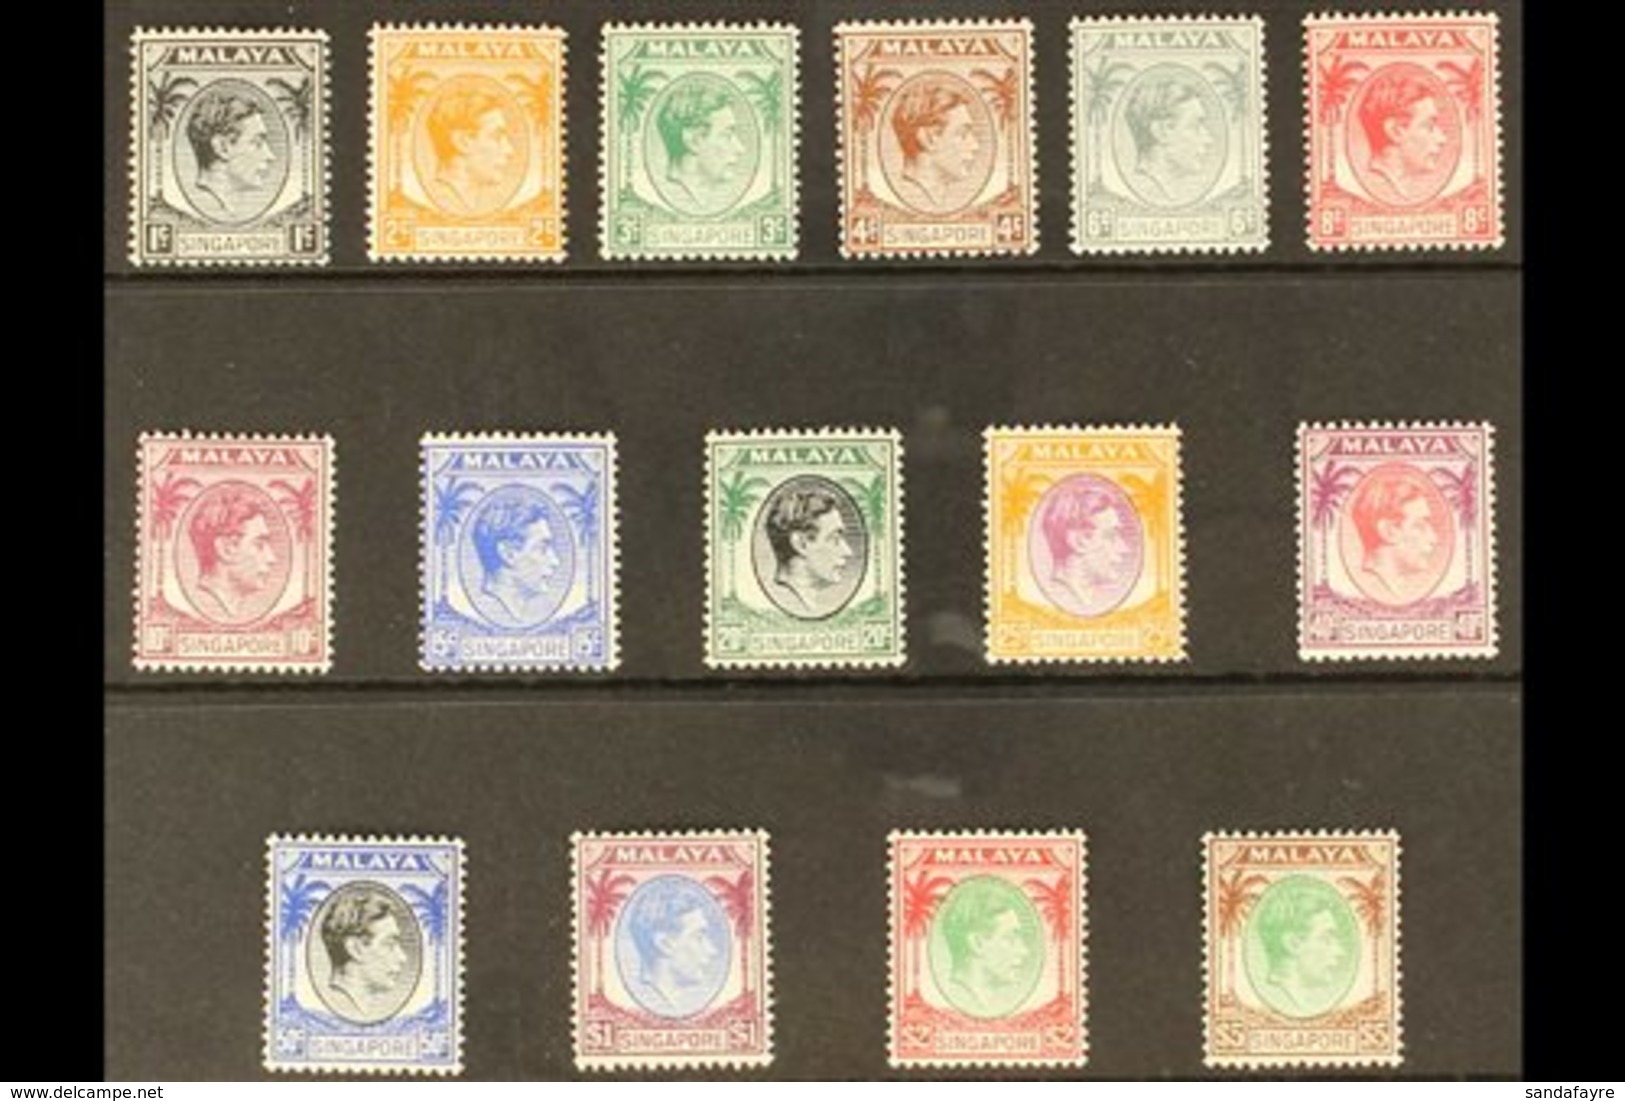 1948-52 KGVI Definitives Perf 14 Complete Set, SG 1/15, Very Fine Mint, Fresh. (15 Stamps) For More Images, Please Visit - Singapour (...-1959)